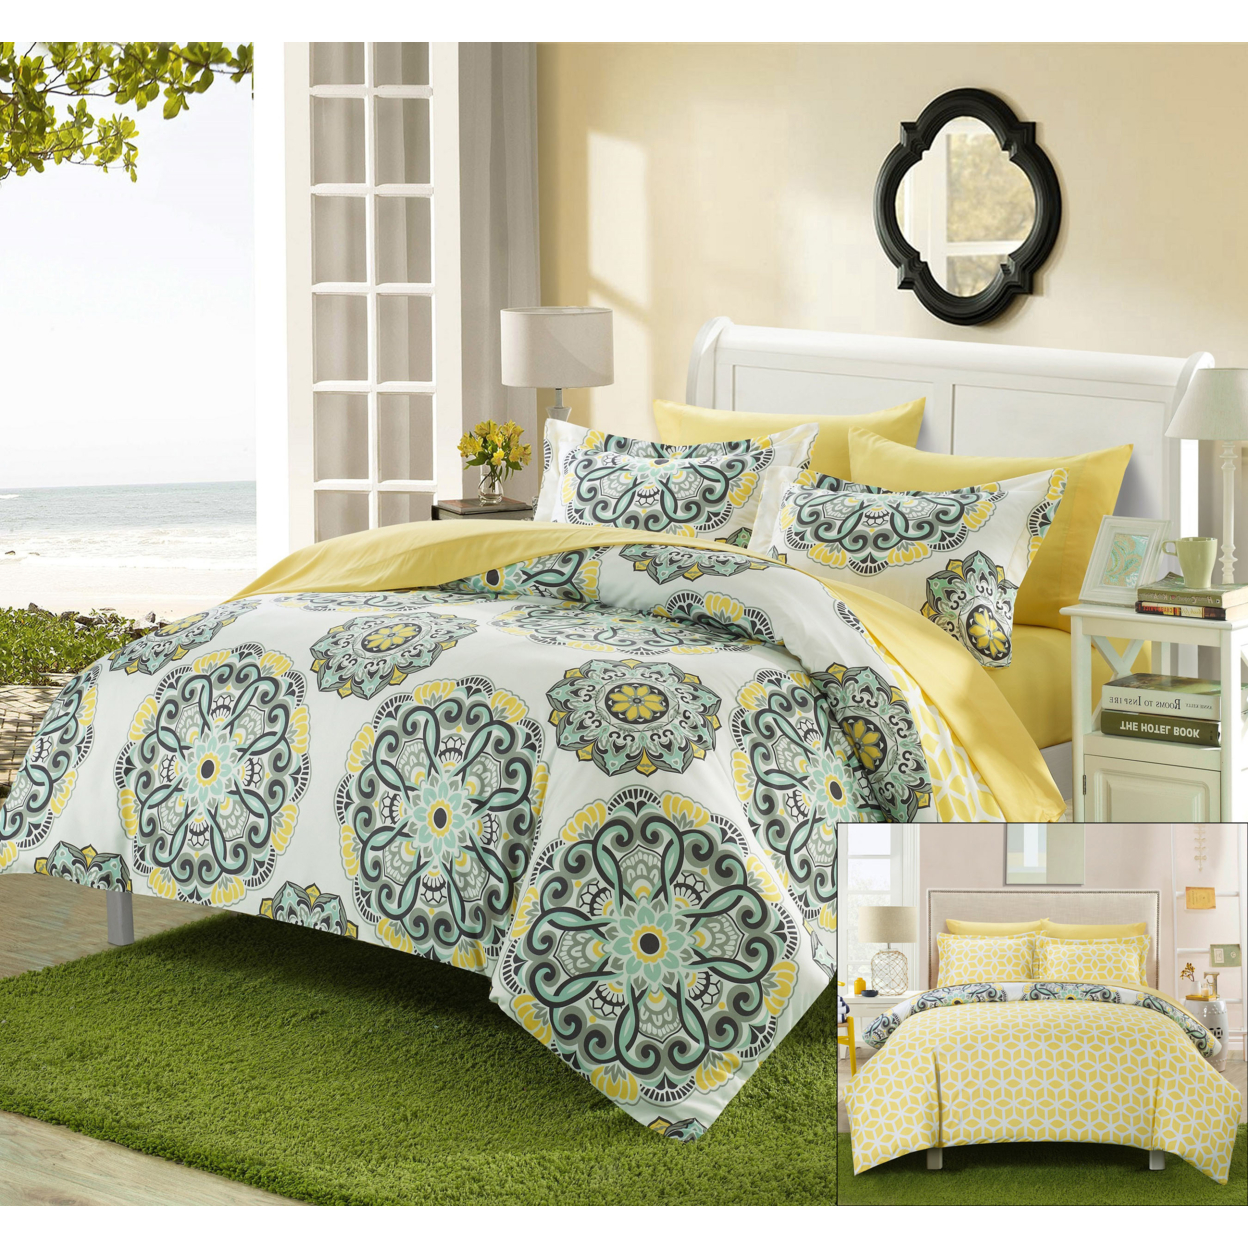 2/3 Piece Majorca Super Soft Microfiber Large Printed Medallion REVERSIBLE With Geometric Printed Backing Duvet Set - Yellow, Twin